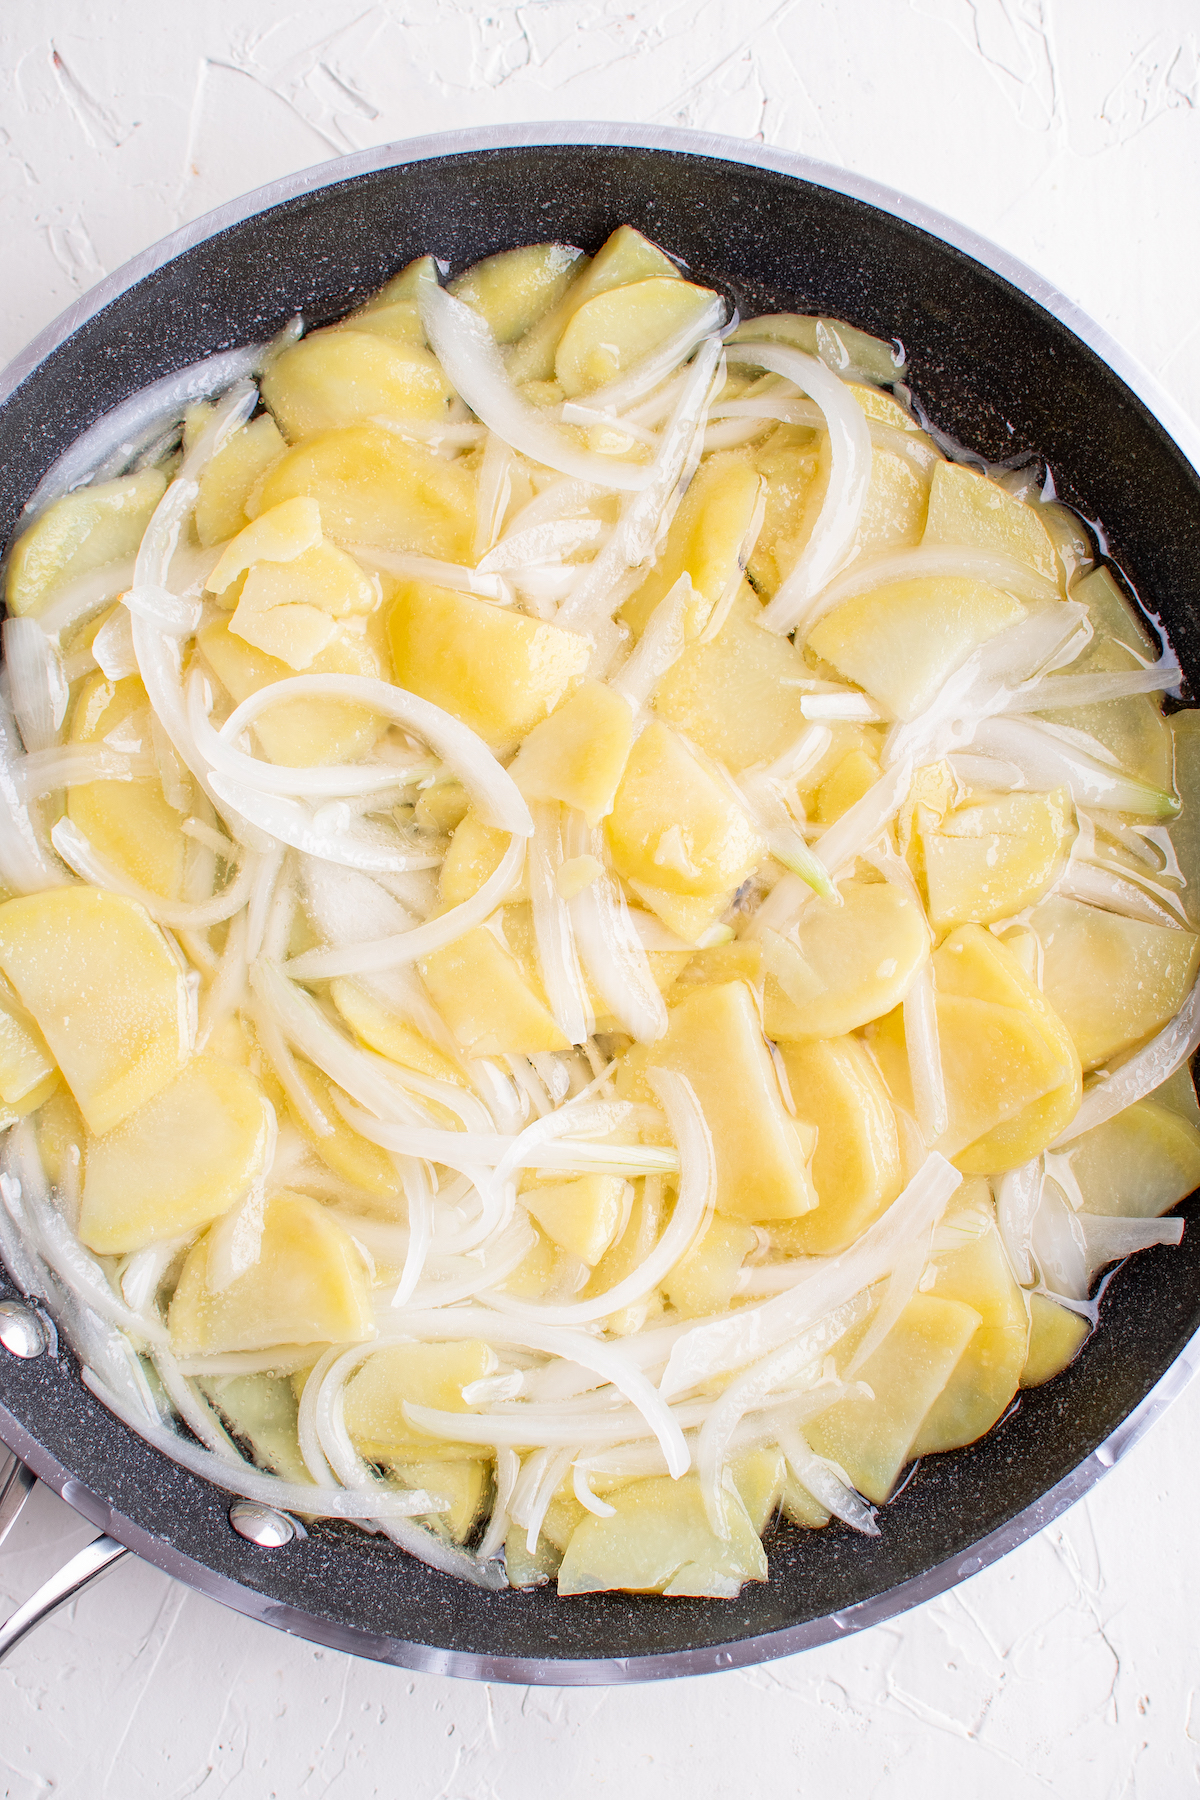 A skillet filled with half-moon slices of potatoes, and slices of onions in oil